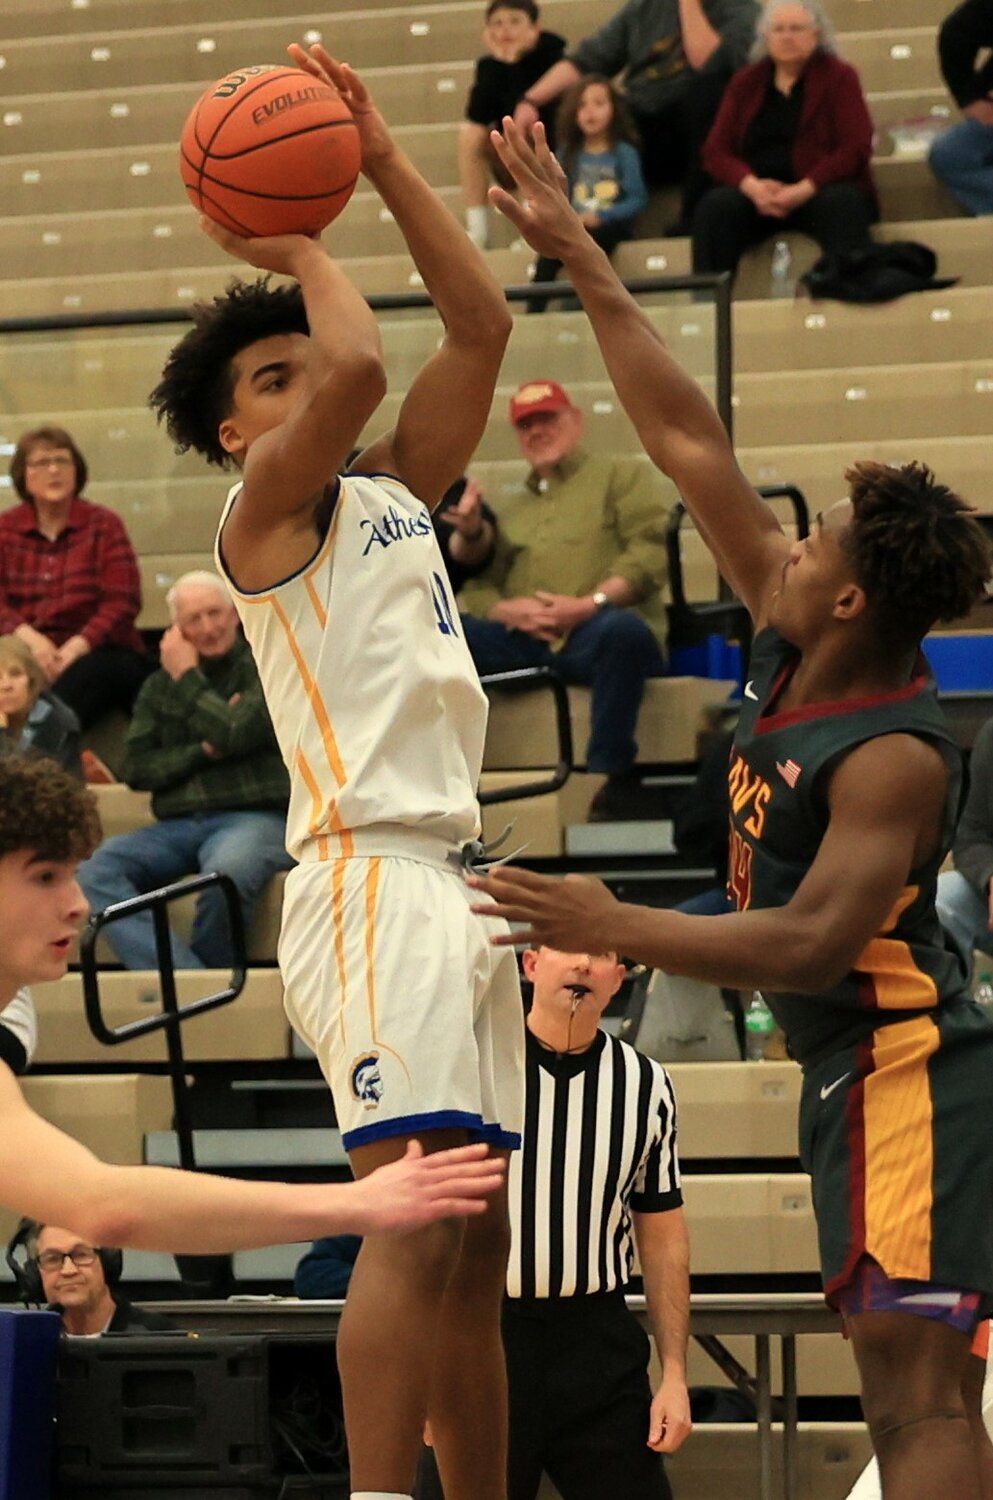 Senior Ethan McLemore scored 22 of Crawfordsville’s 36 points in a 71-36 loss to  the red-hot shooting McCutcheon Mavericks on Tuesday night.